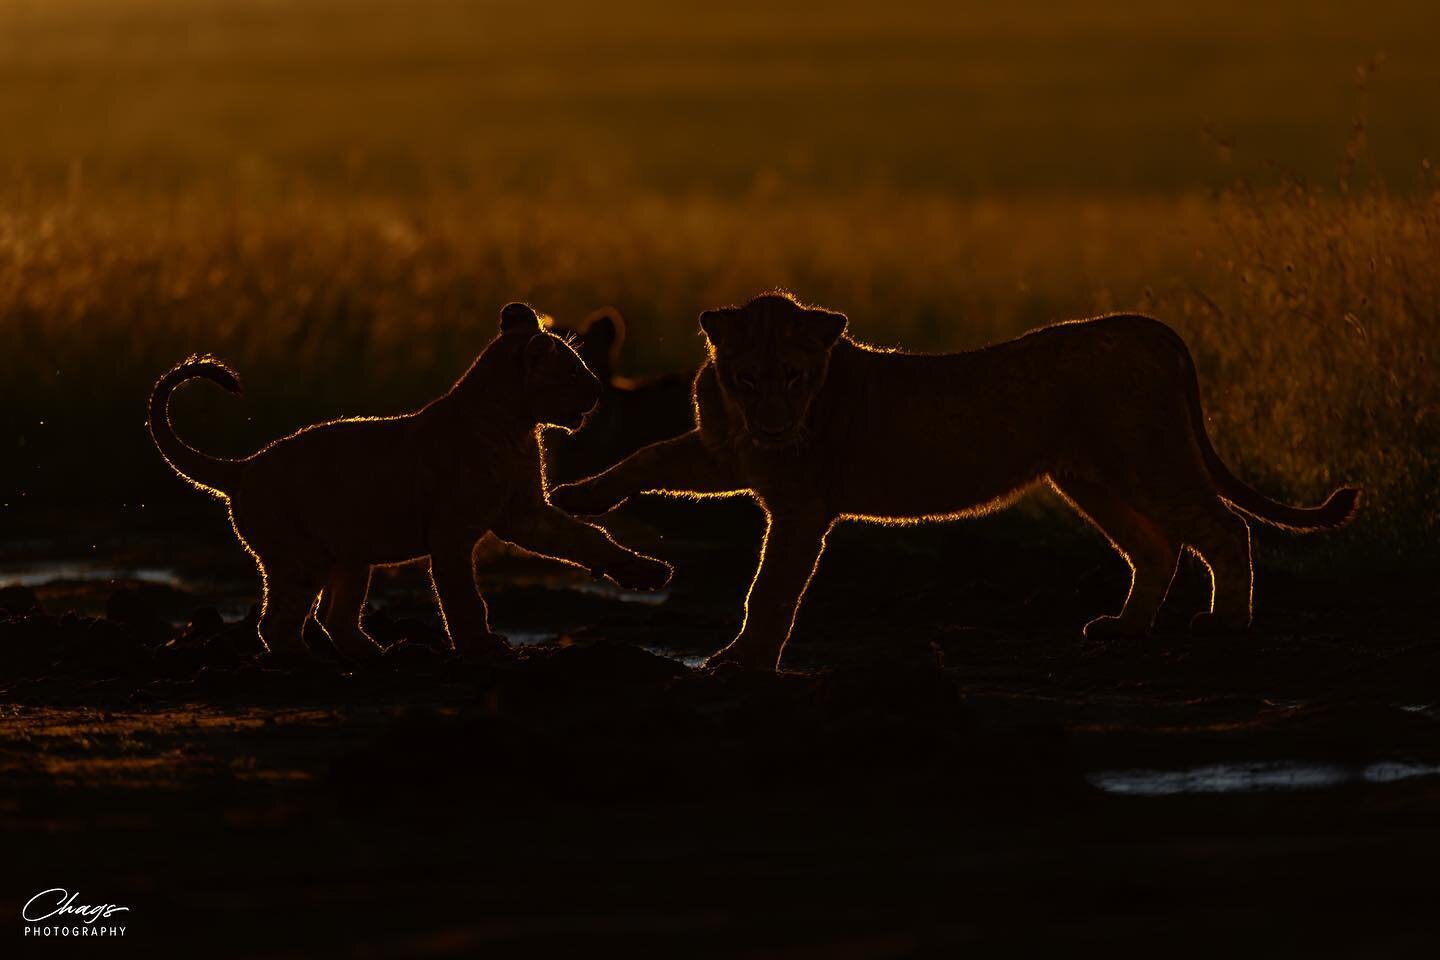 @chags.photography  Two images, one message. Between the lion cubs&rsquo; silent plea and the void of their absence, lies our choice. 
#ActForNature
#ProtectWildlife
#WorldWildlifeDay
.
.
.
.
#saveourwildlife
#chagsphotography
#naturewildlifephotogra